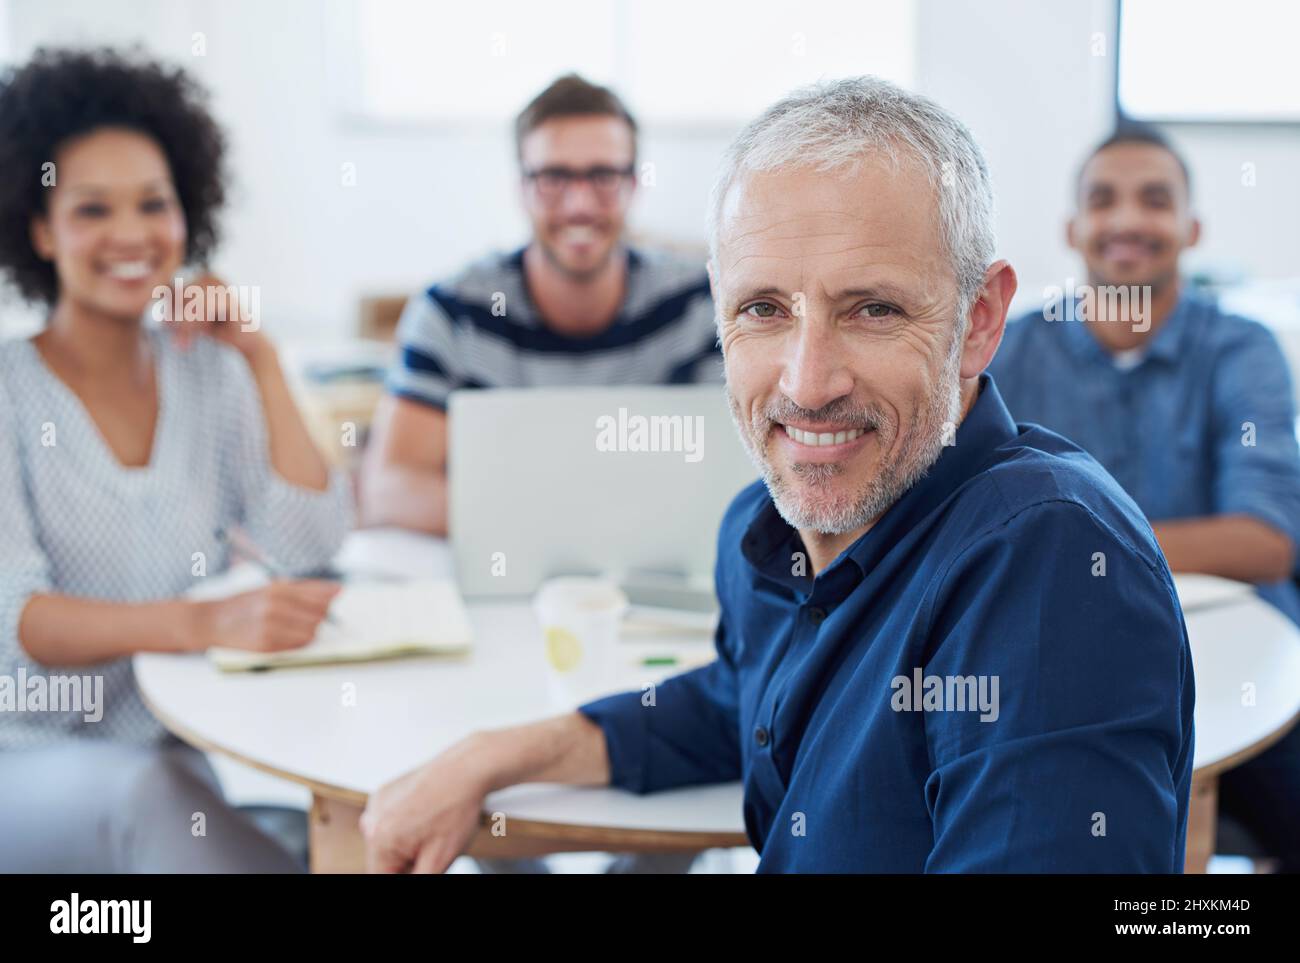 Taking his team to new places. Portrait of a group of designers at work in an office. Stock Photo